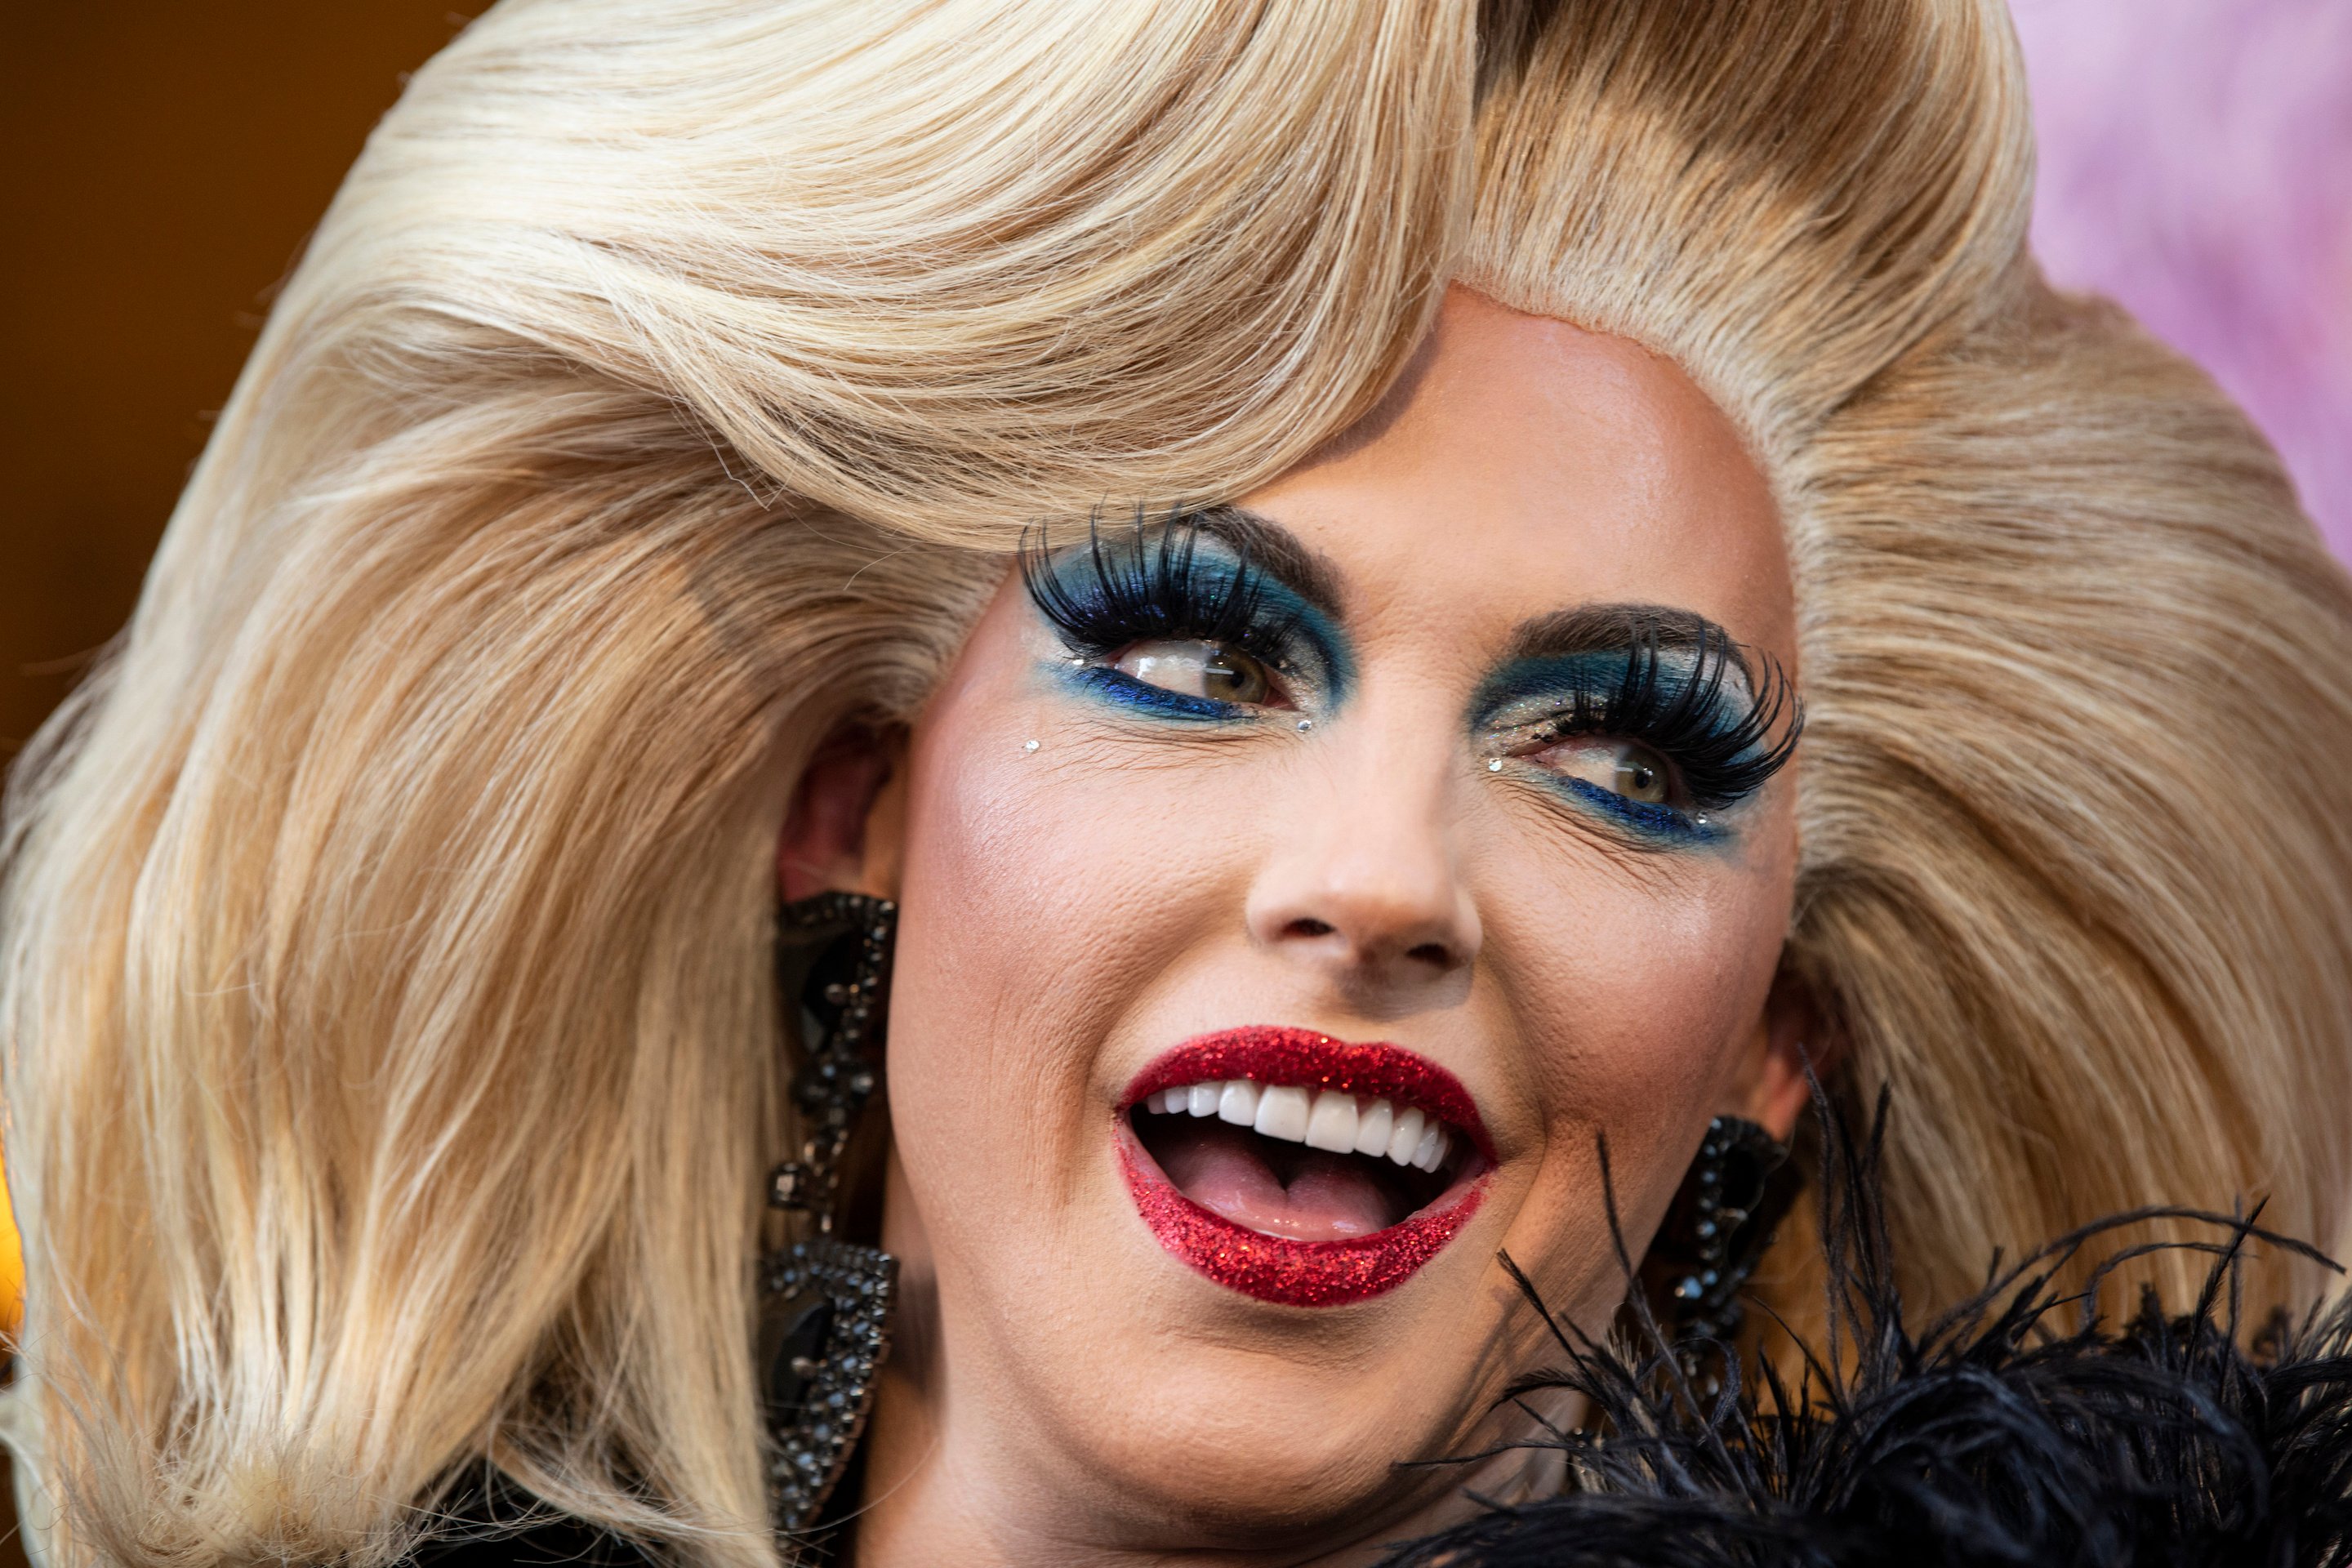 Drag superstar Alyssa Edwards (and her dance company) shines in